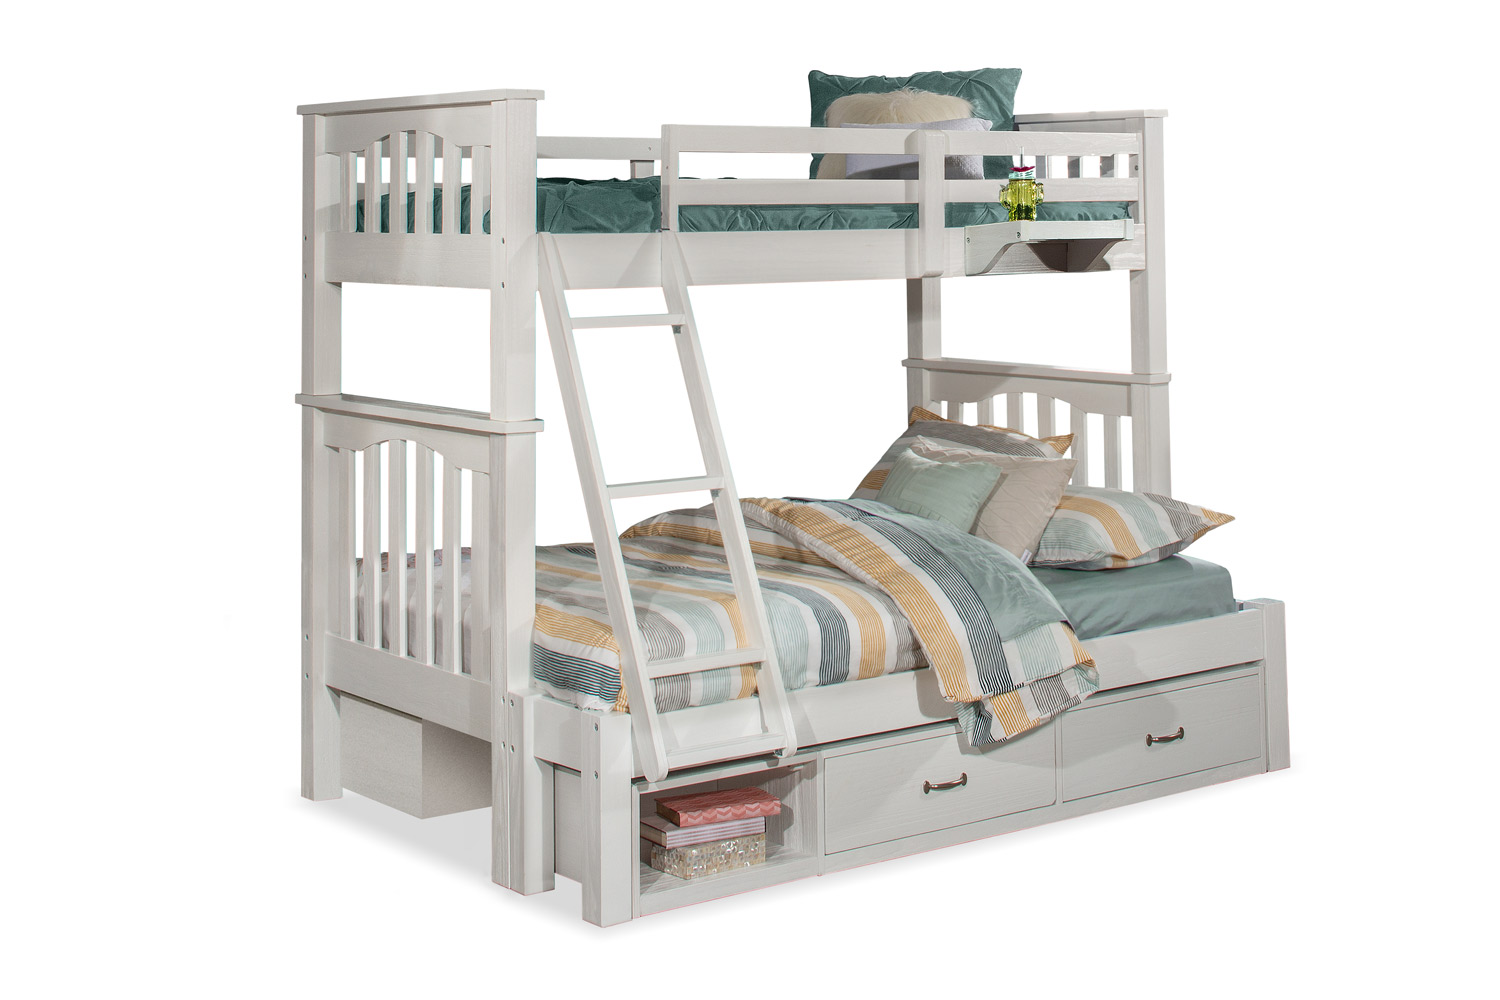 NE Kids Highlands Harper Twin/Full Bunk Bed with (2) Storage Units and Hanging Nightstand - White Finish